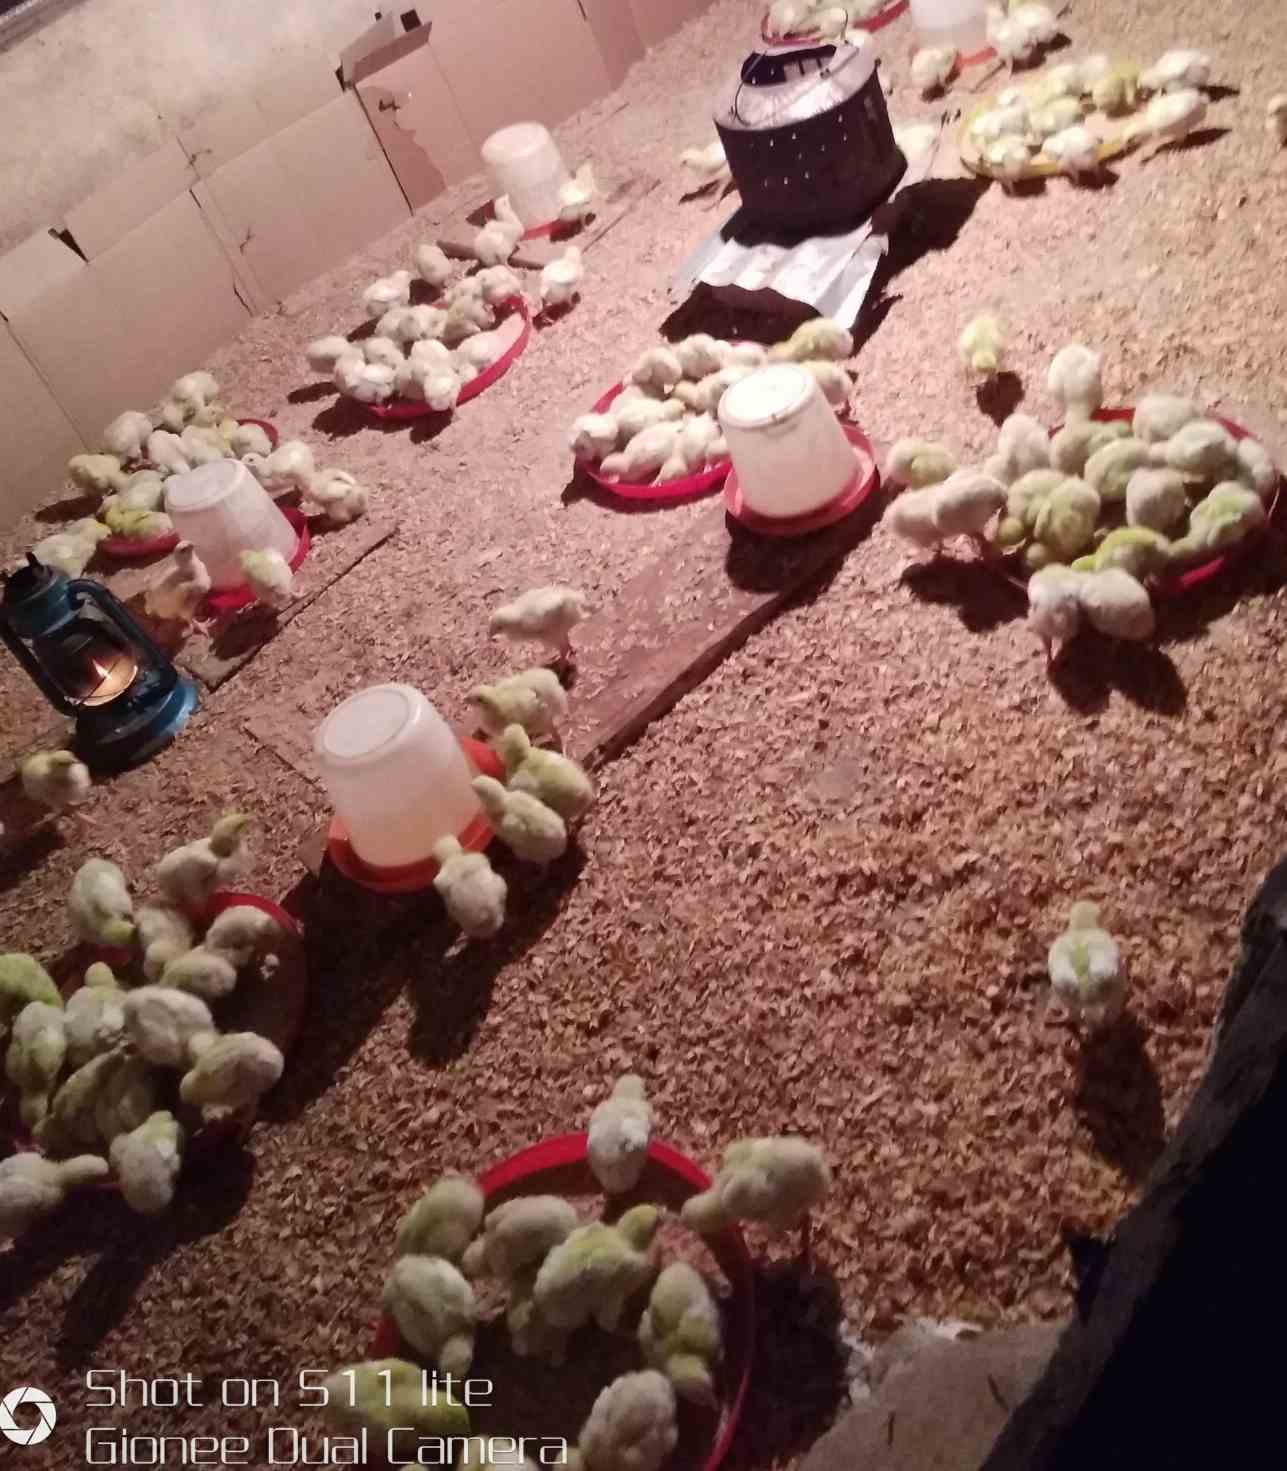  cost for rearing  500 broilers